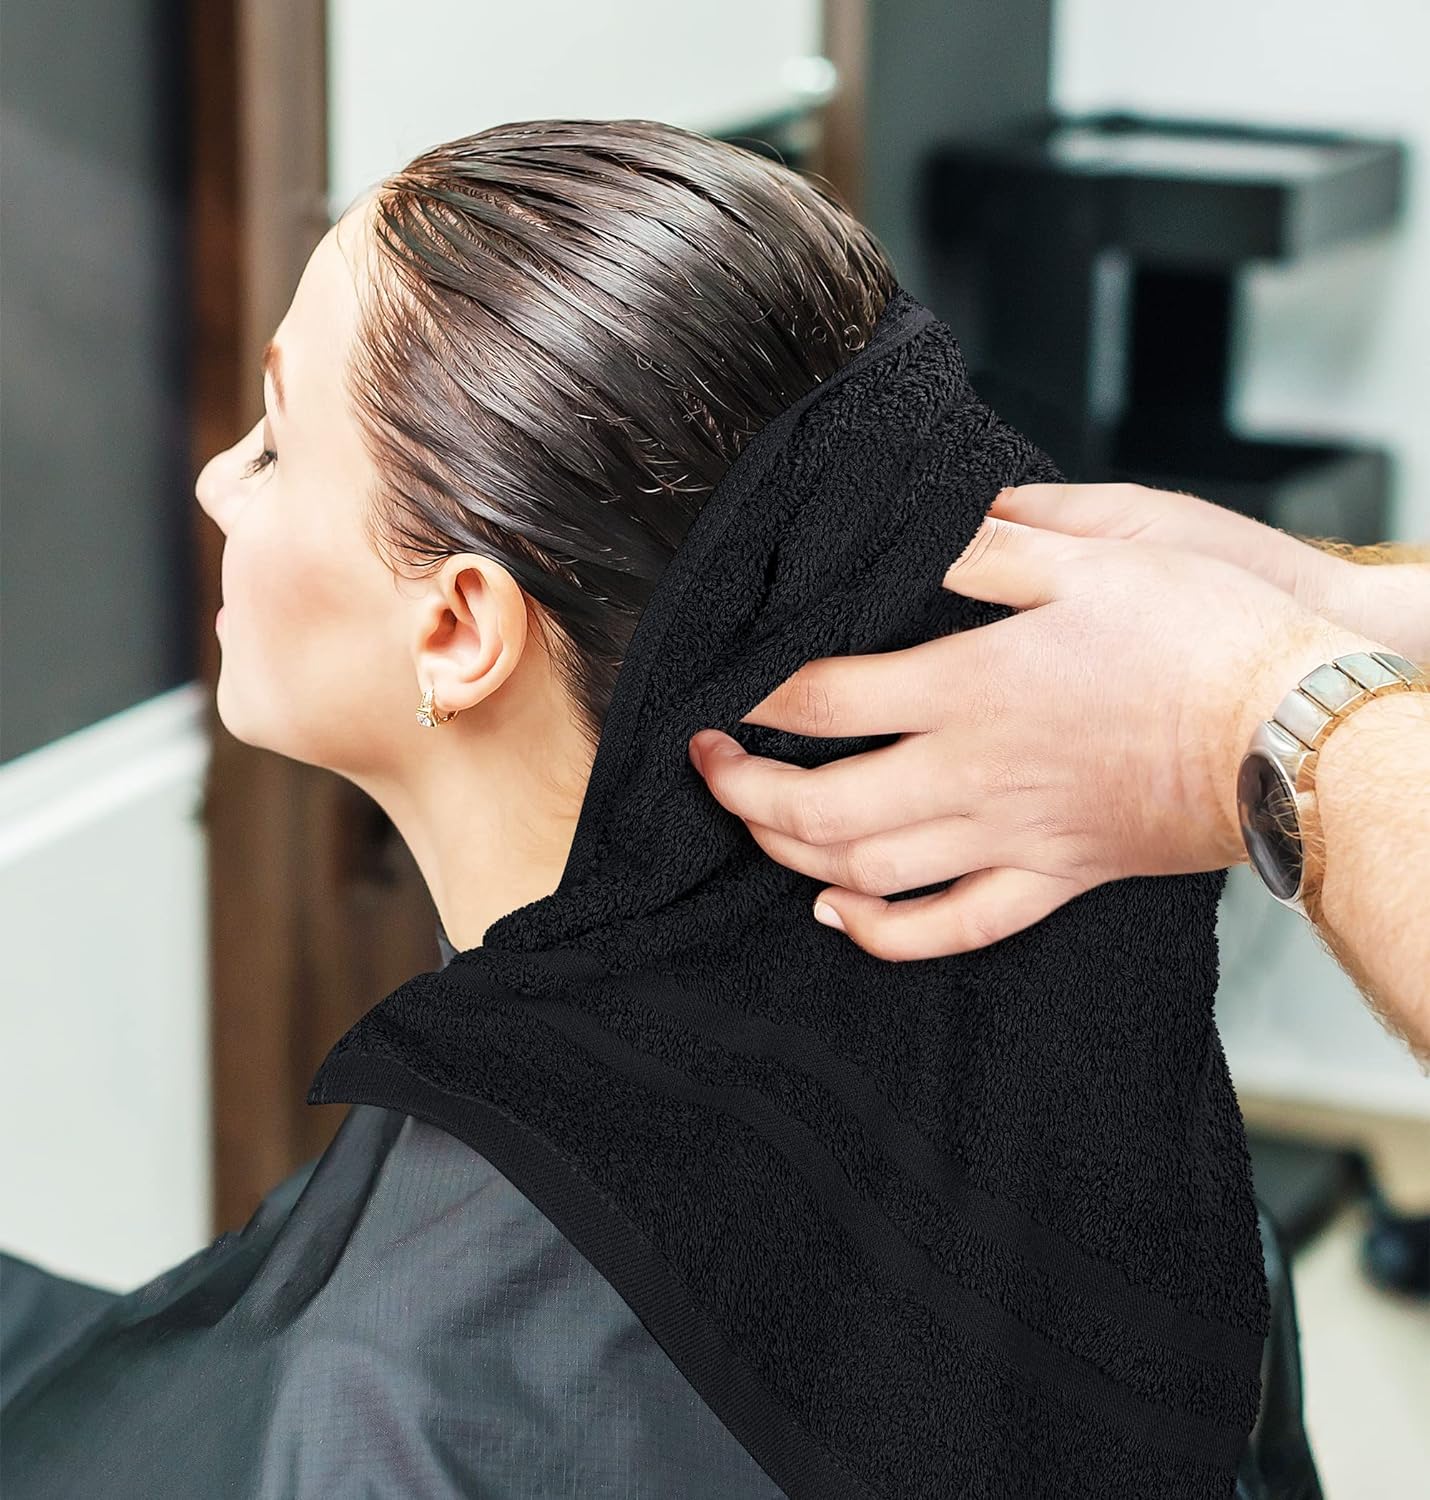 What advantages do bleach-resistant towels have in a salon setting?